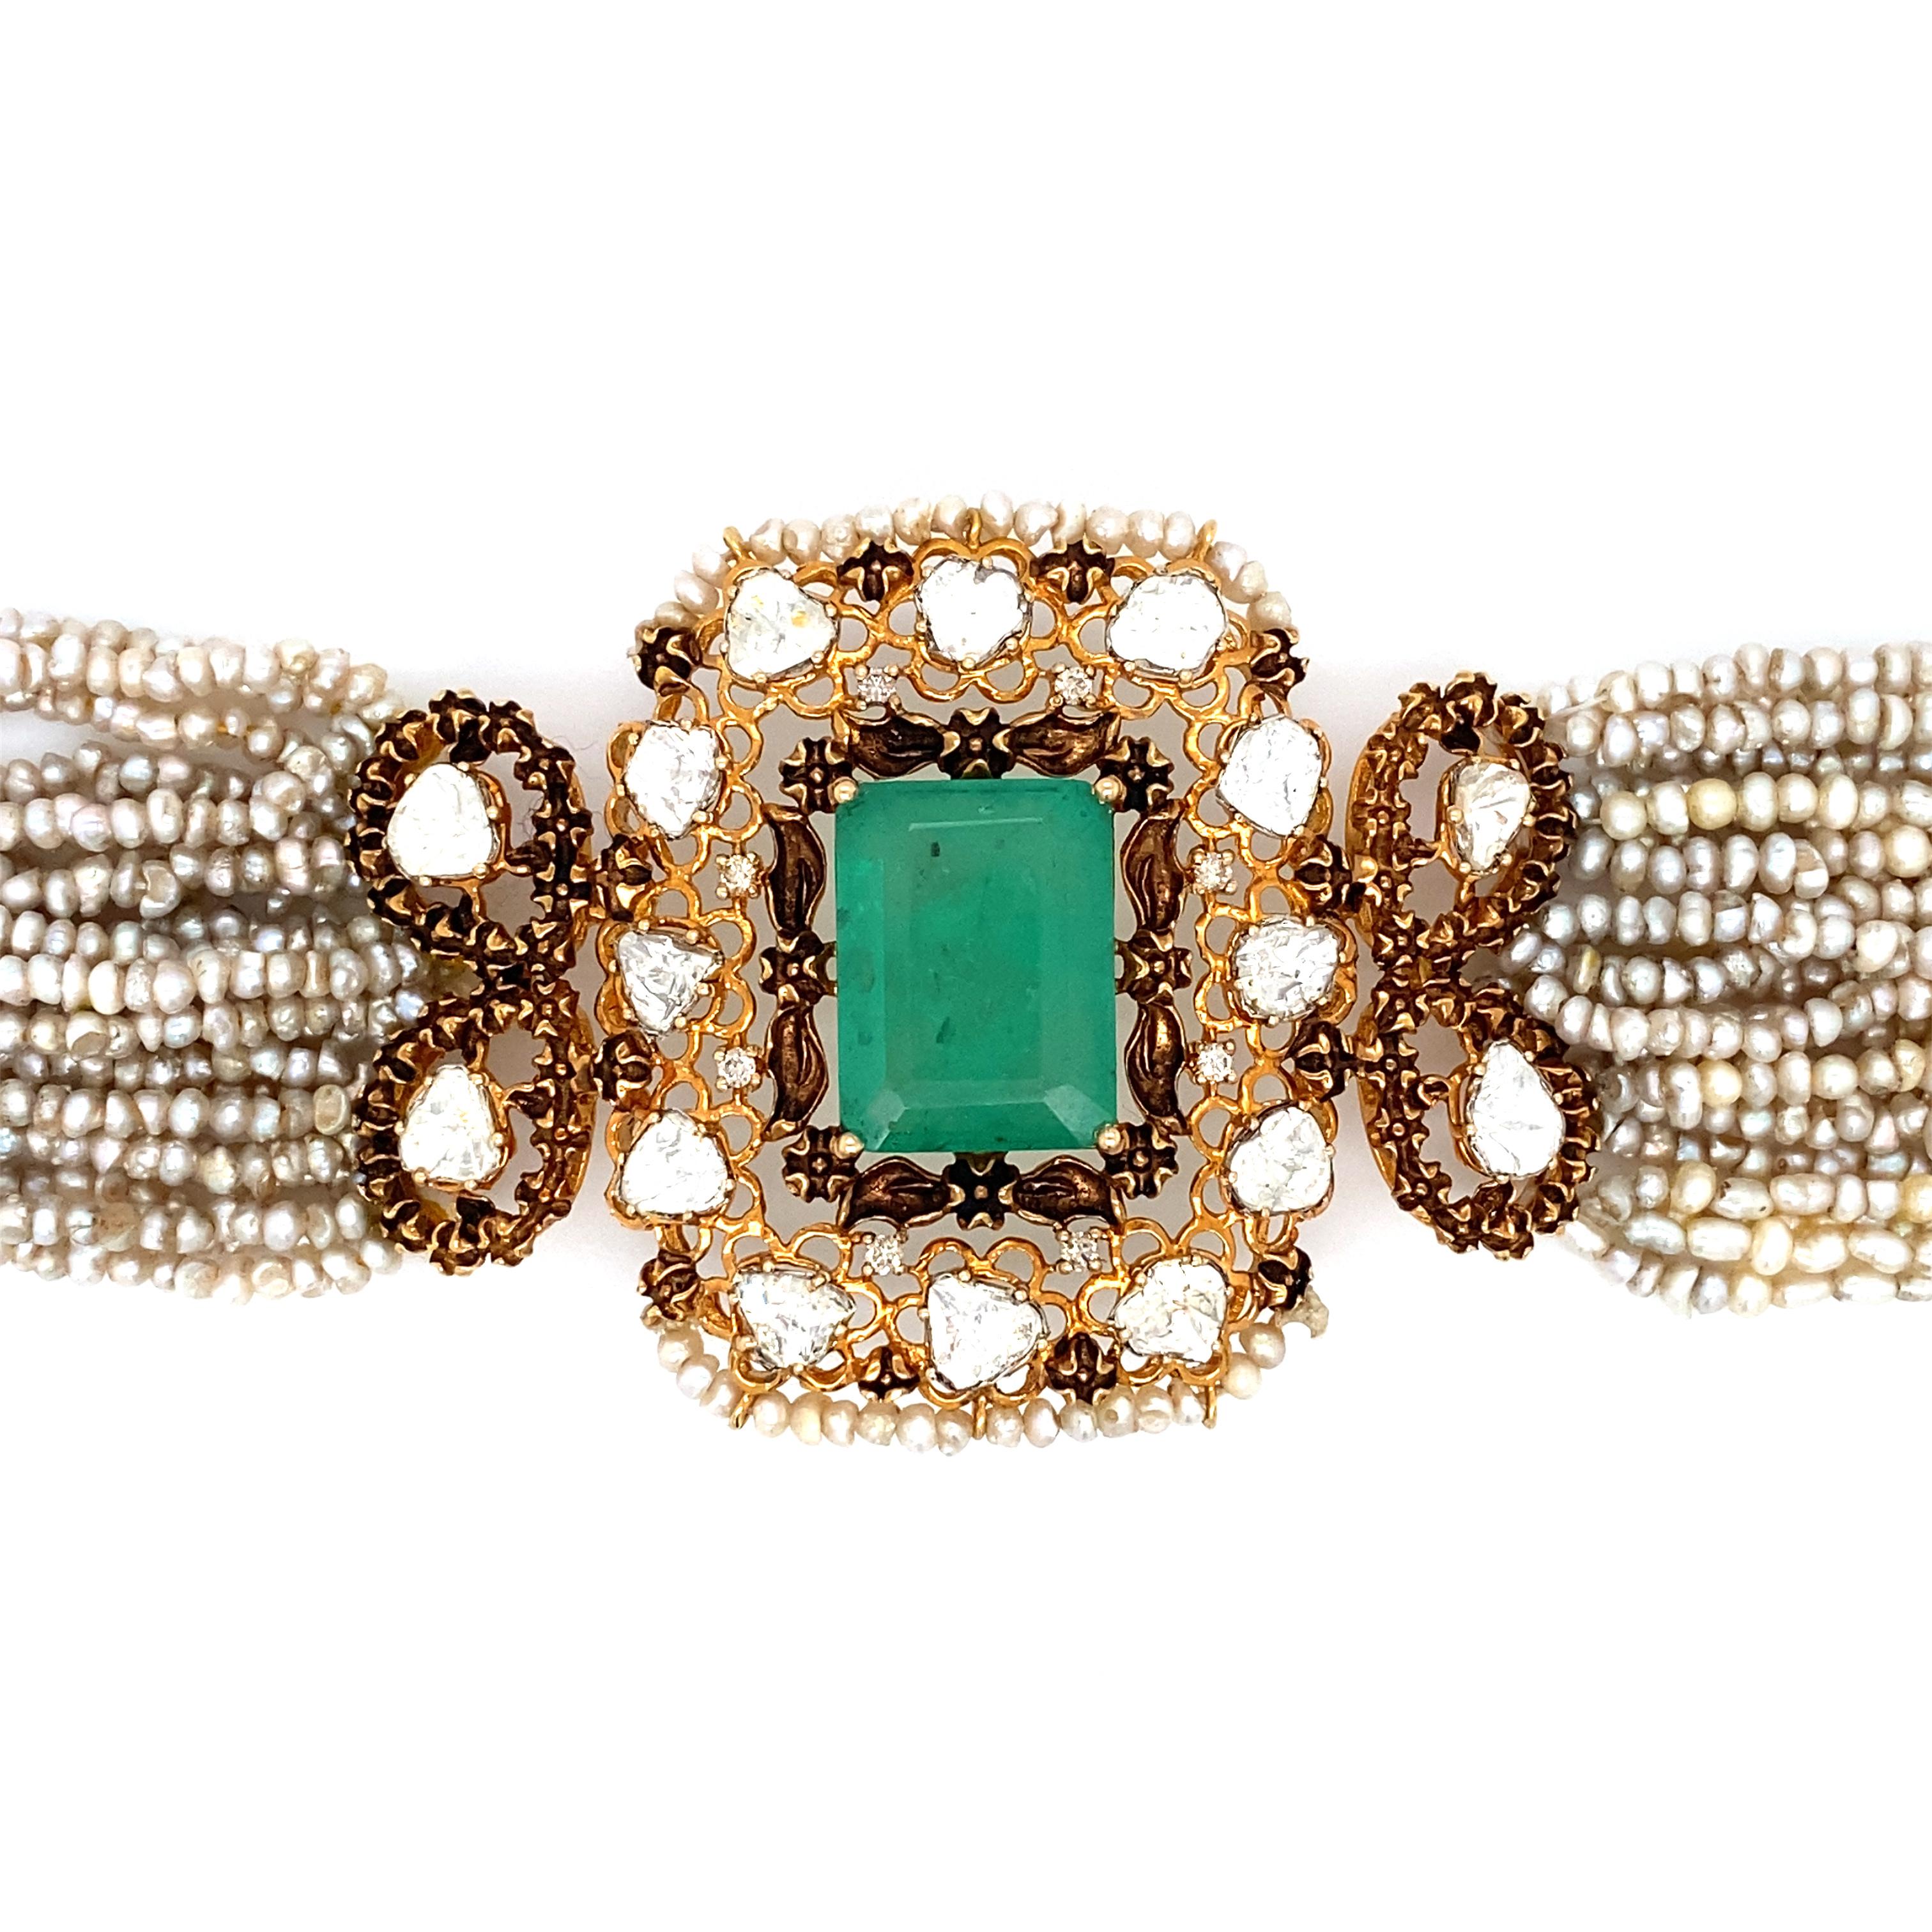 Art Deco Victorian Revival Seed Pearl and Emerald Bracelet in 14 Karat Gold, circa 1950s  For Sale